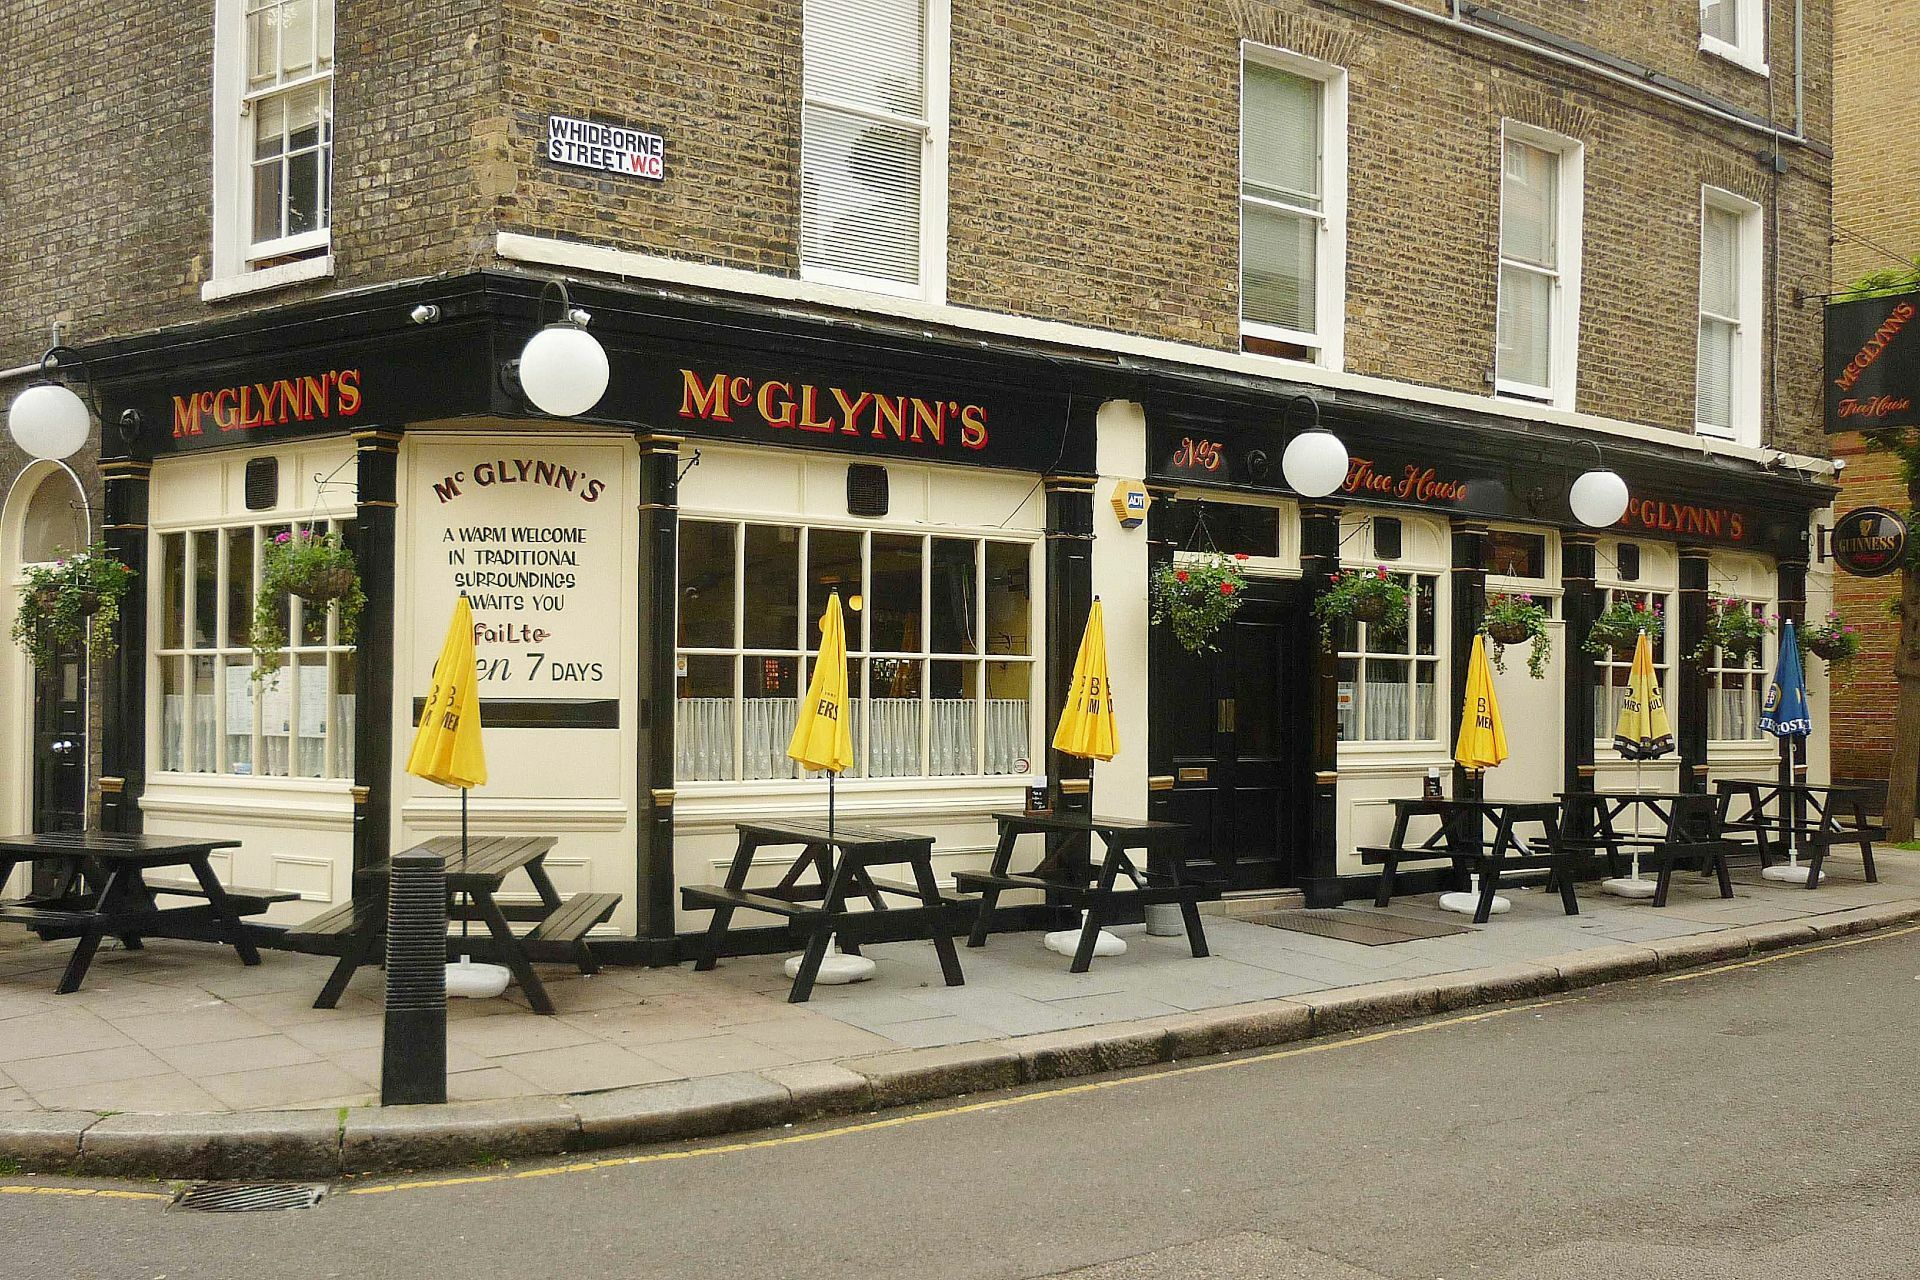 beloved-king’s-cross-pub-mcglynn’s-could-be-closing